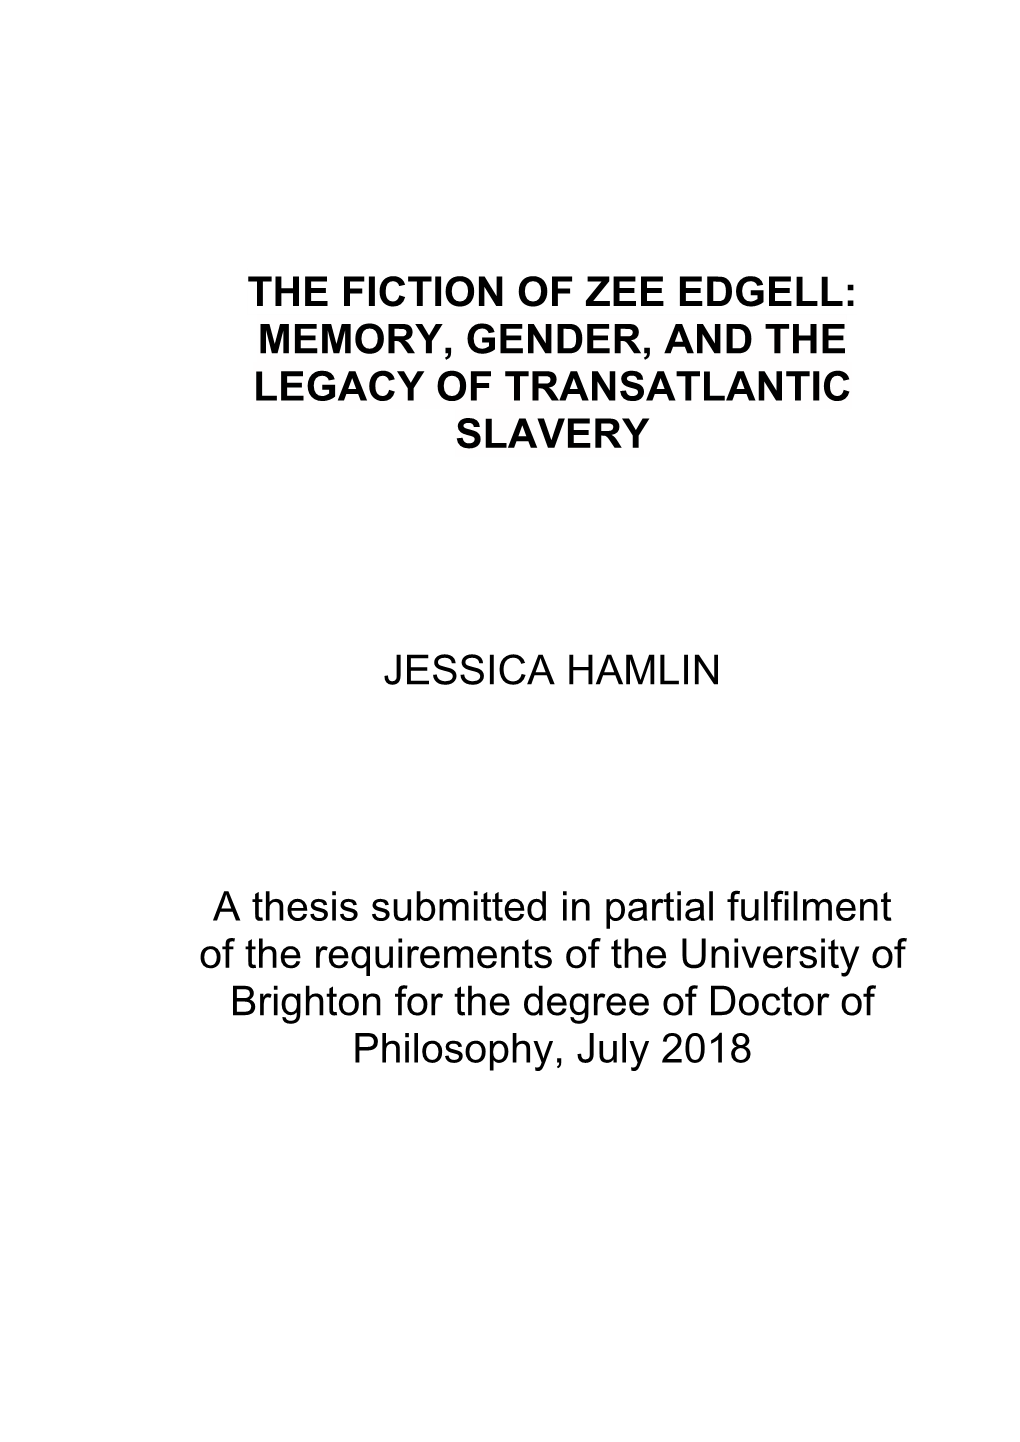 The Fiction of Zee Edgell: Memory, Gender, and the Legacy of Transatlantic Slavery